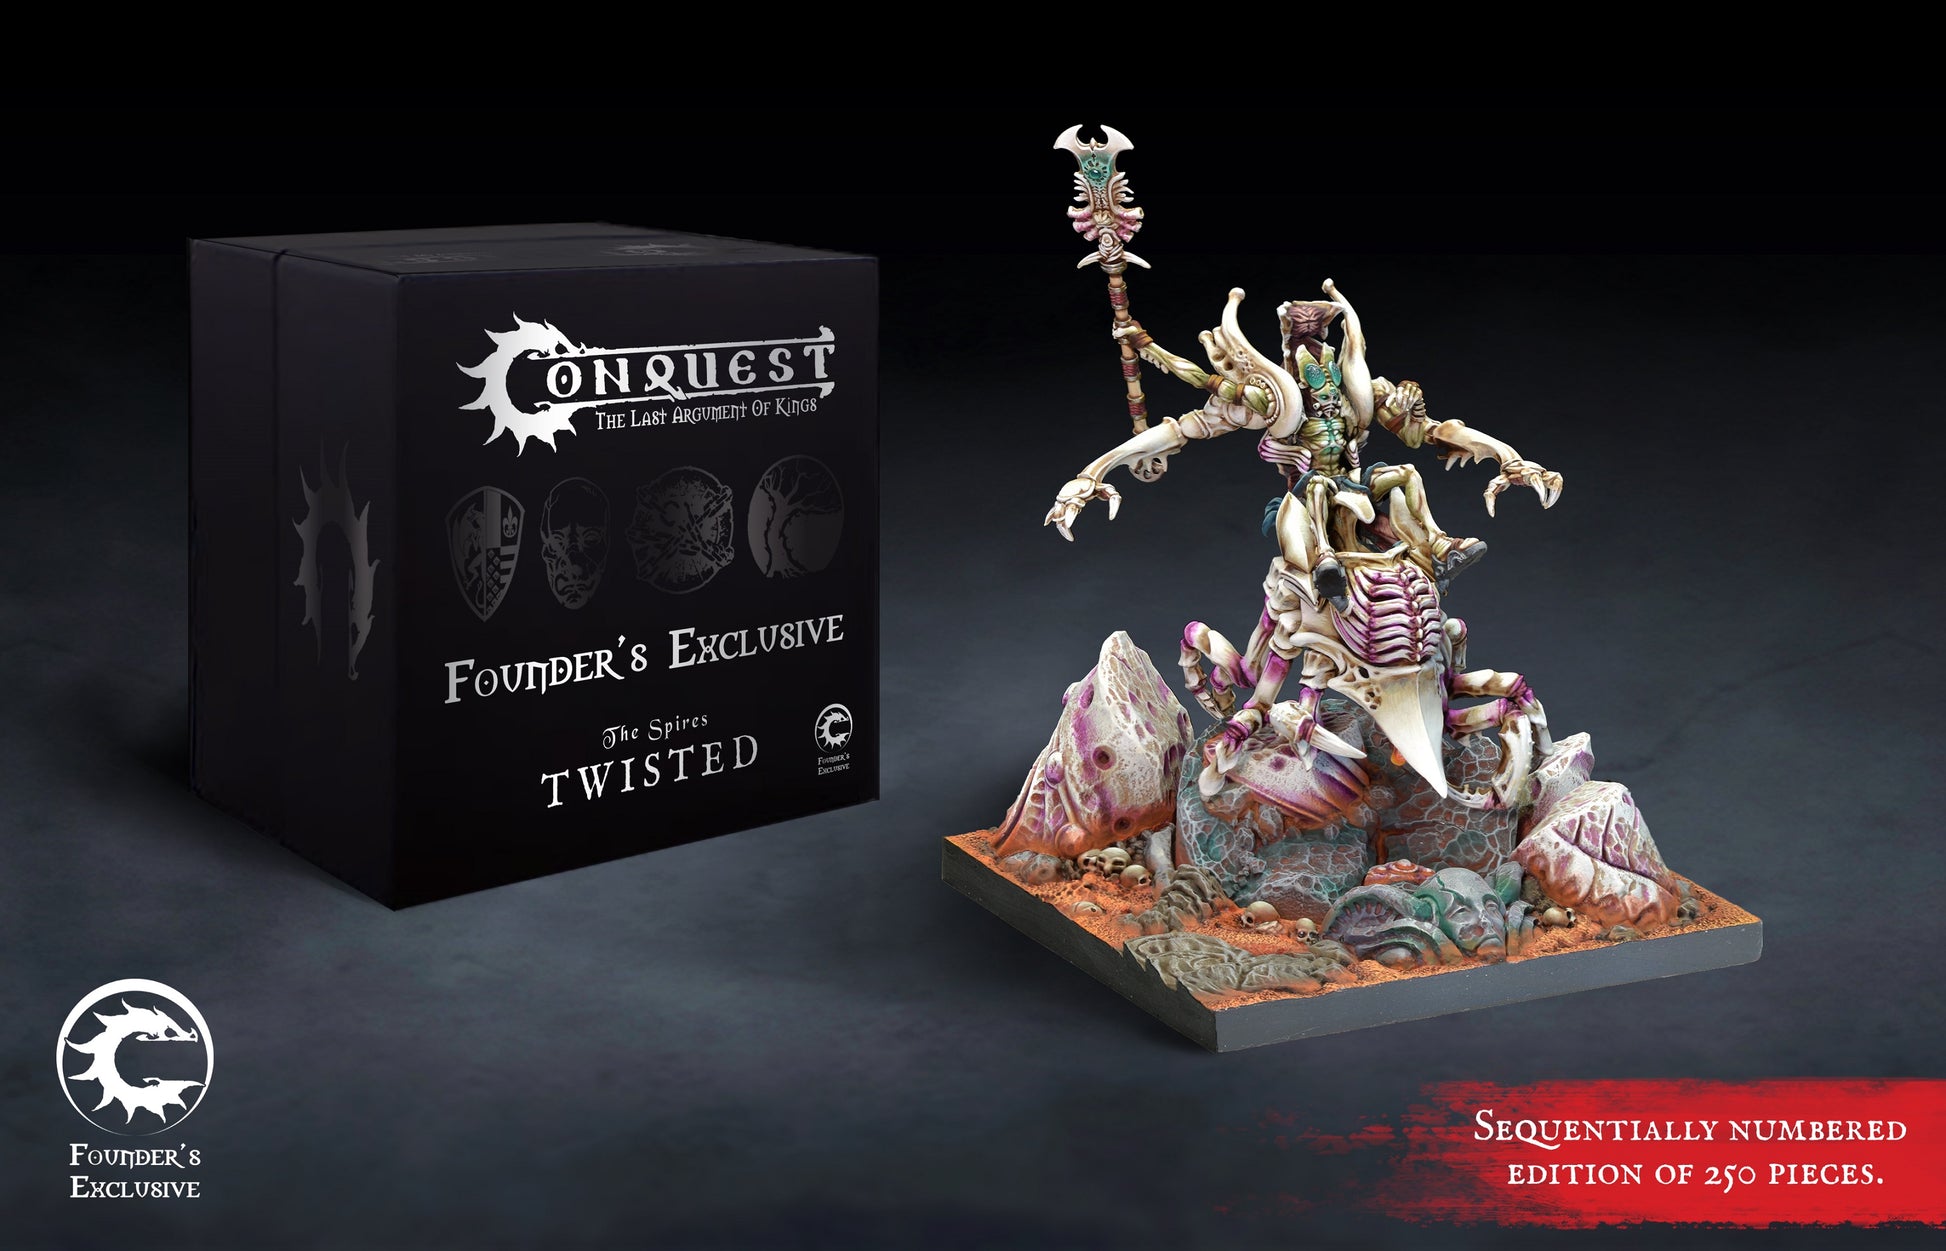 Spires: Twisted Retinue Founder's Exclusive Edition Conquest - The Last Argument of Kings Aetherworks   